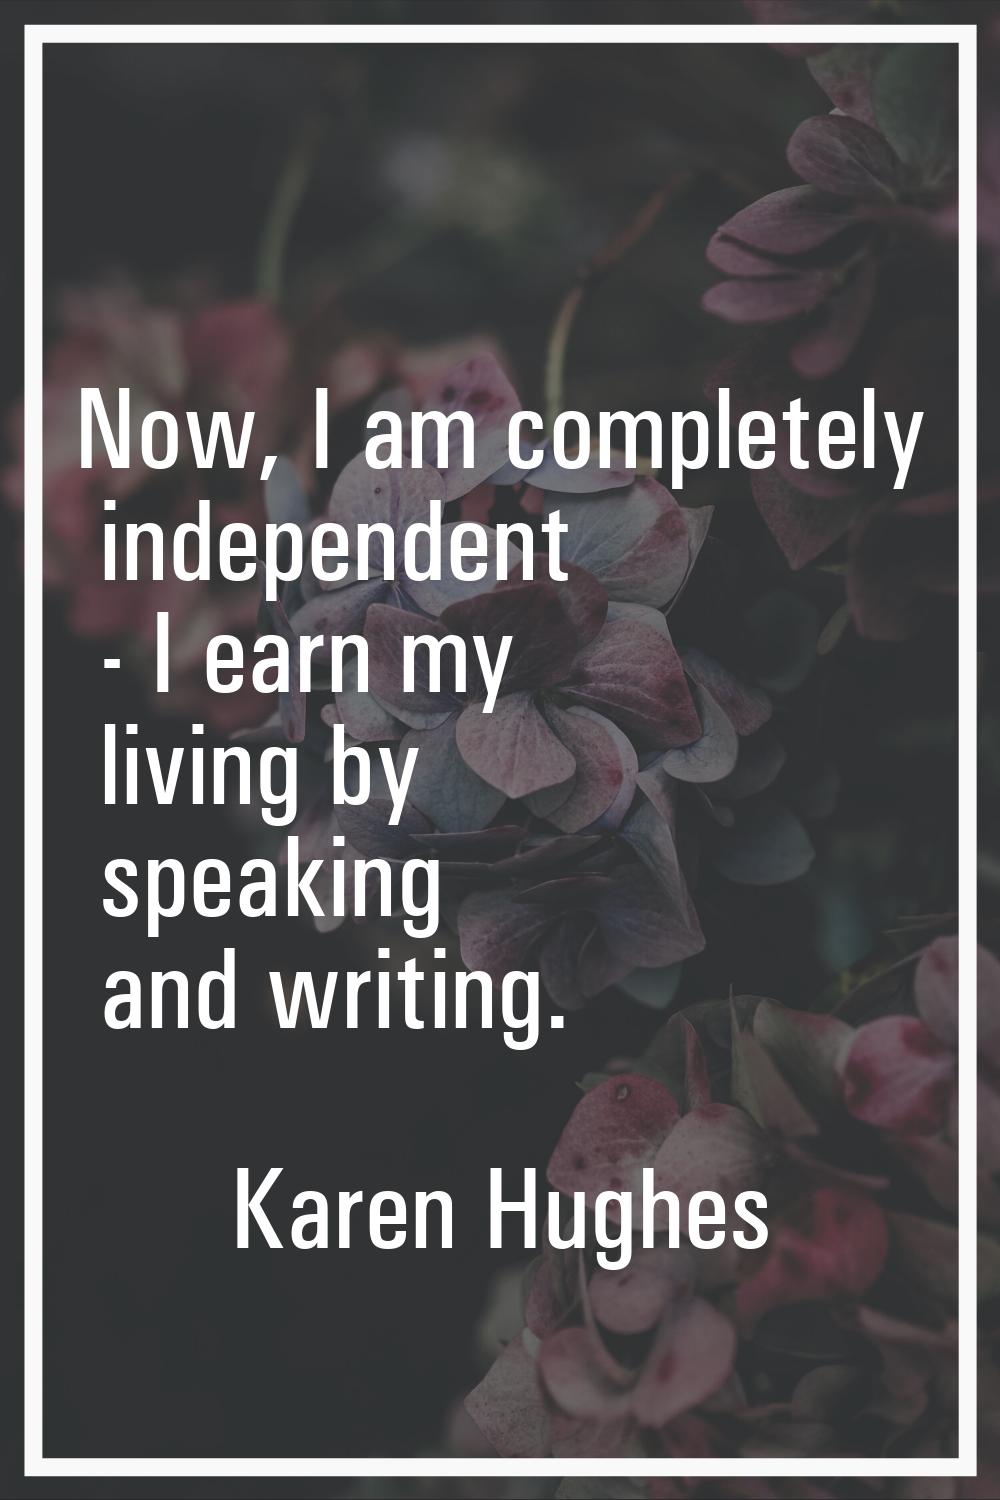 Now, I am completely independent - I earn my living by speaking and writing.